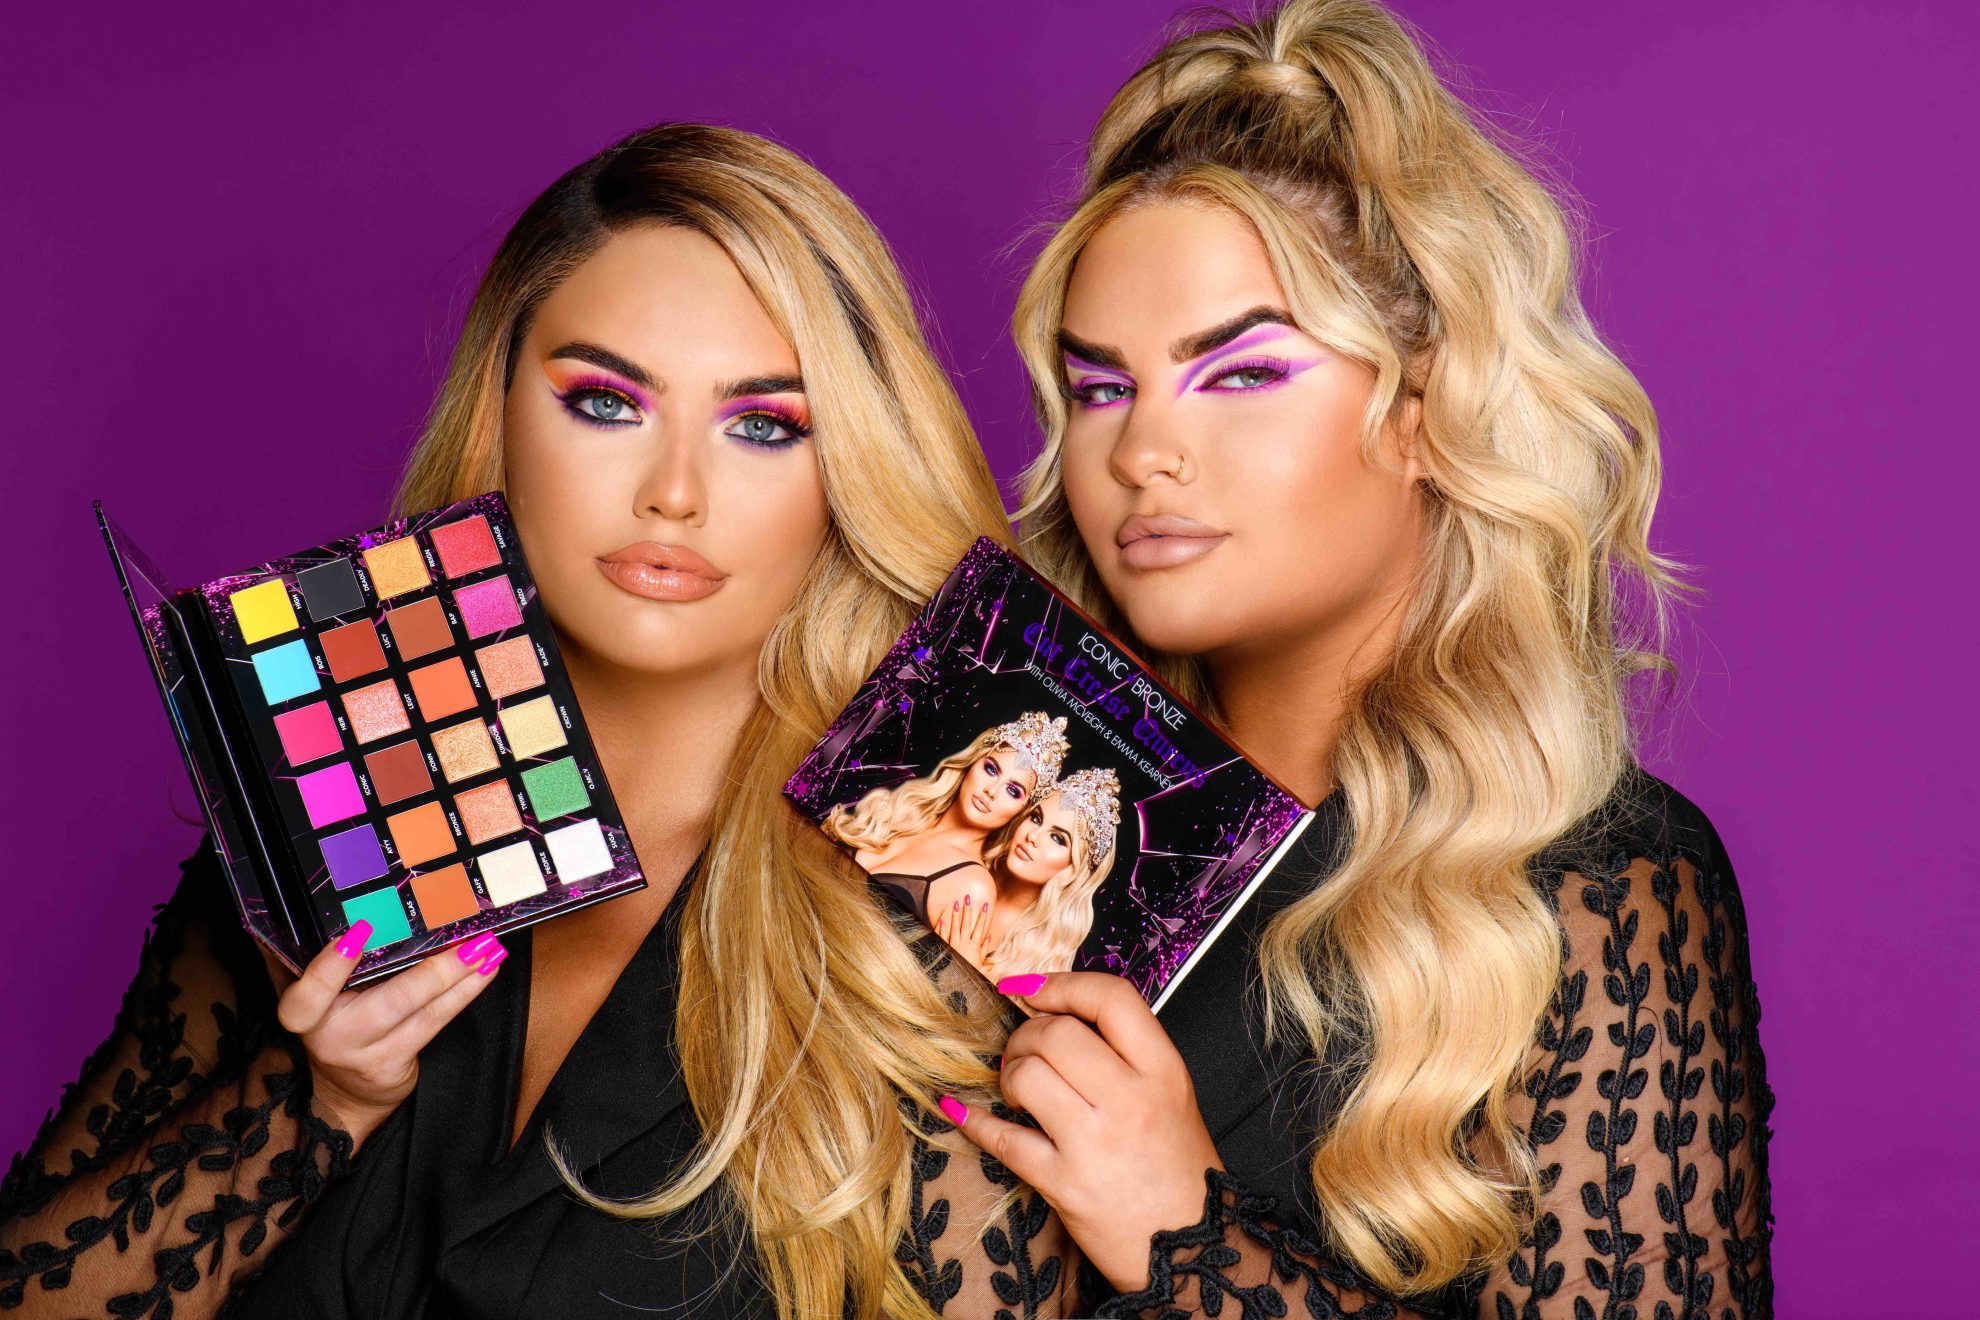 This image shows Olivia McVeigh & Emma Kearney holding their new Cut Crease Queens eye shadow palette.